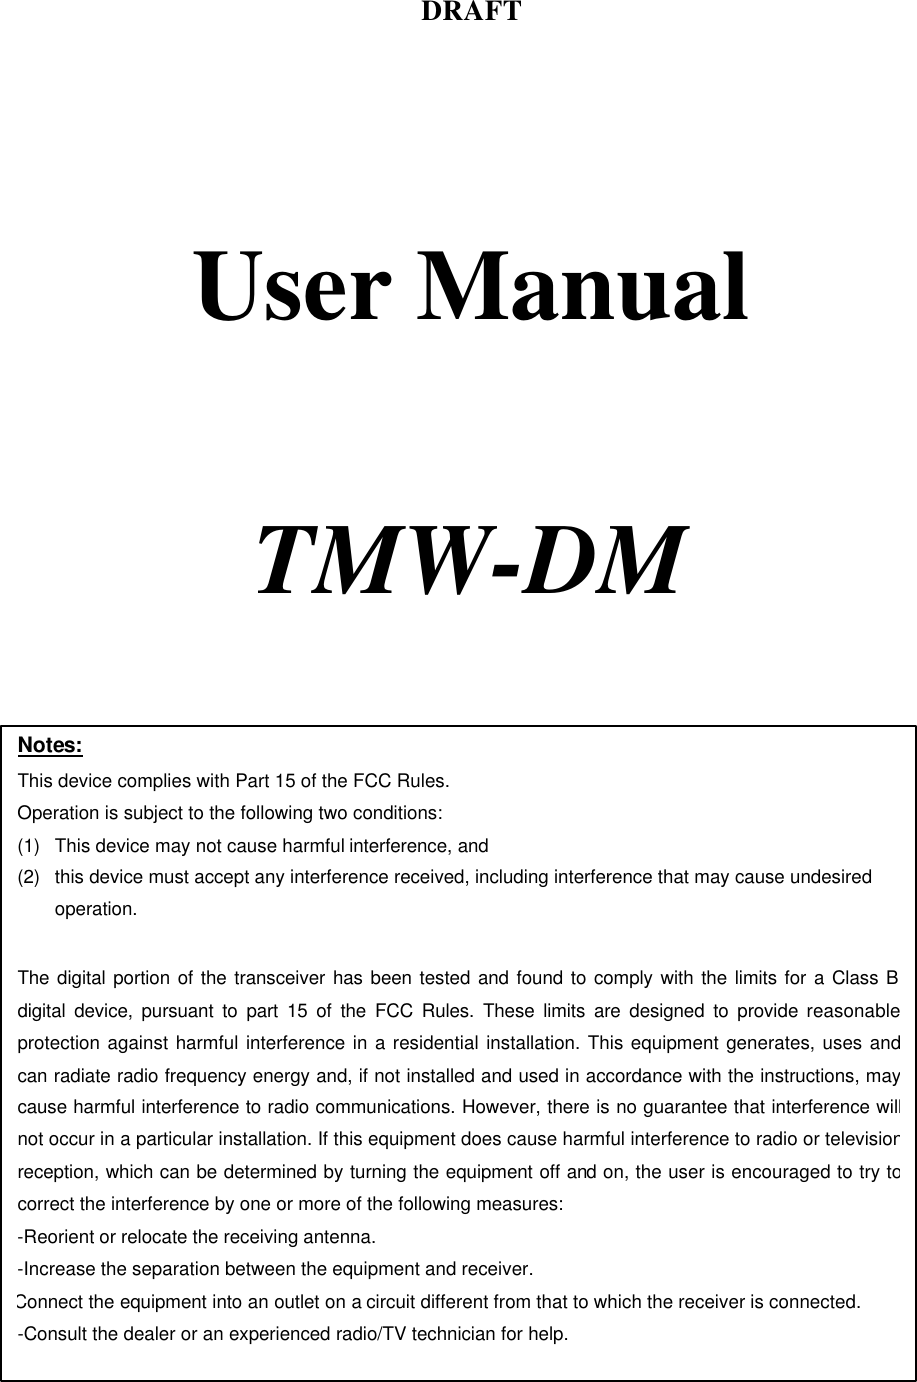 DRAFT     User Manual     TMW-DM    Notes: This device complies with Part 15 of the FCC Rules. Operation is subject to the following two conditions: (1) This device may not cause harmful interference, and (2) this device must accept any interference received, including interference that may cause undesired operation.  The digital portion of the transceiver has been tested and found to comply with the limits for a Class B digital device, pursuant to part 15 of the FCC Rules. These limits are designed to provide reasonable protection against harmful interference in a residential installation. This equipment generates, uses and can radiate radio frequency energy and, if not installed and used in accordance with the instructions, may cause harmful interference to radio communications. However, there is no guarantee that interference will not occur in a particular installation. If this equipment does cause harmful interference to radio or television reception, which can be determined by turning the equipment off and on, the user is encouraged to try to correct the interference by one or more of the following measures:  -Reorient or relocate the receiving antenna. -Increase the separation between the equipment and receiver. Connect the equipment into an outlet on a circuit different from that to which the receiver is connected. -Consult the dealer or an experienced radio/TV technician for help.  